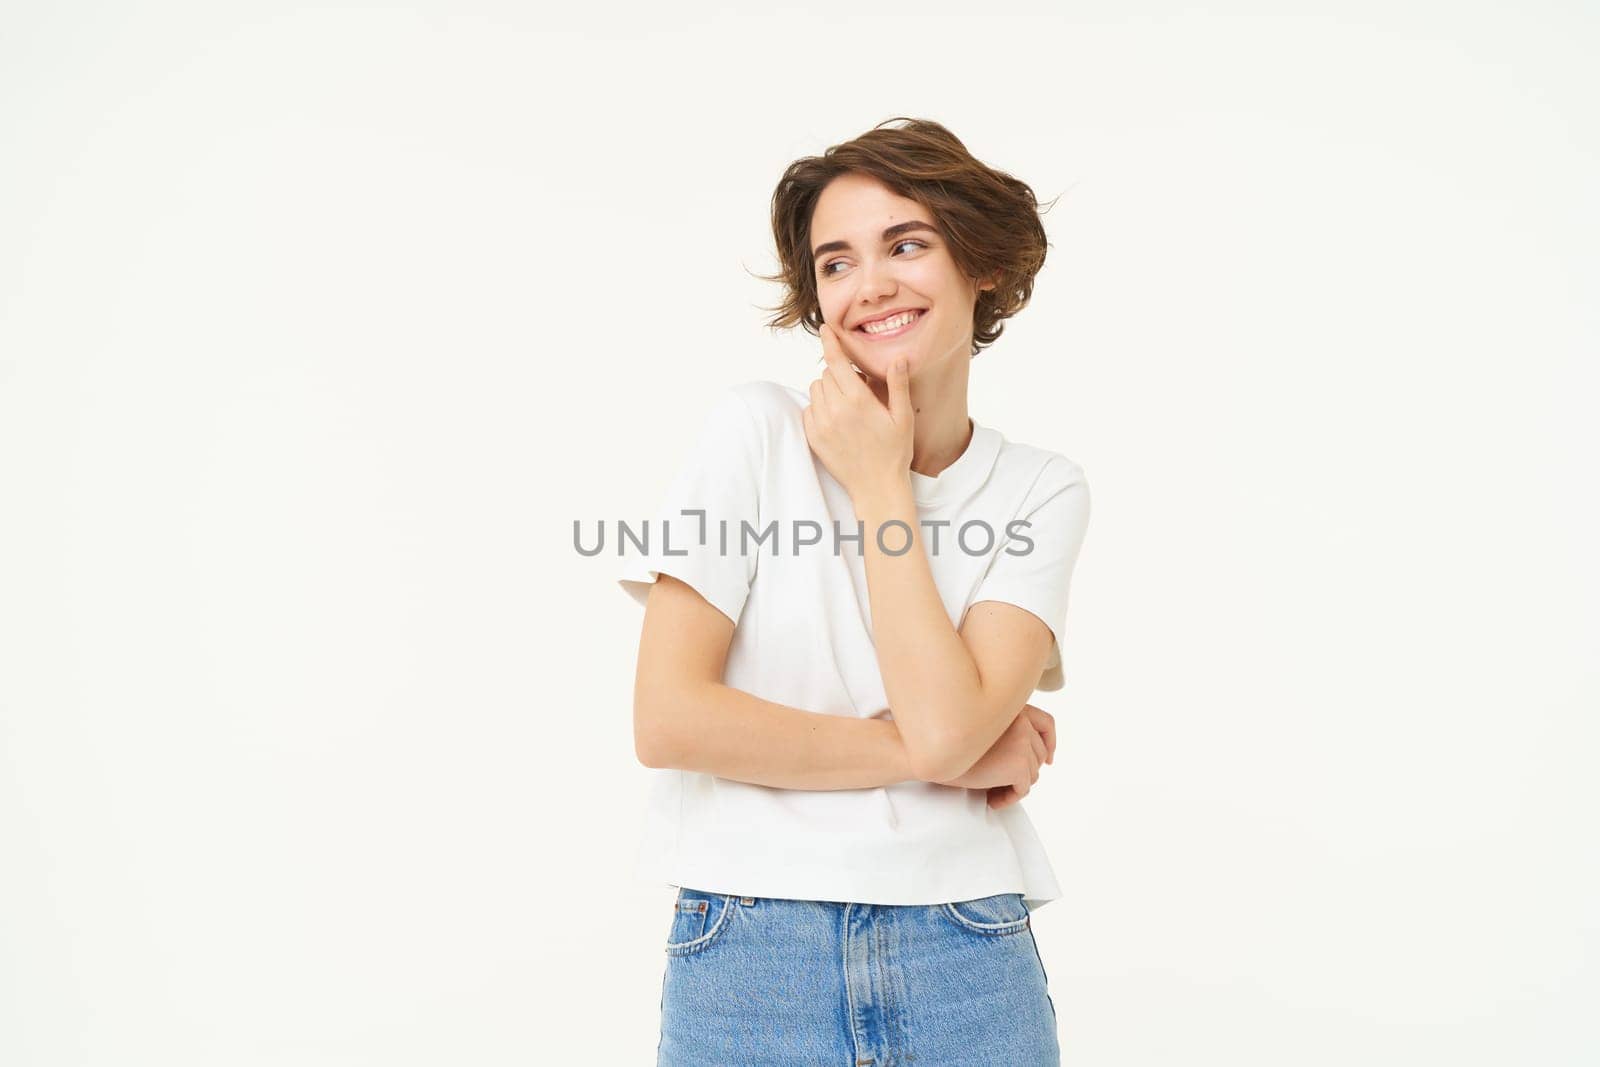 Portrait of young woman in casual clothes, laughing and smiling, touching her face without blemishes, standing over white background. Copy space